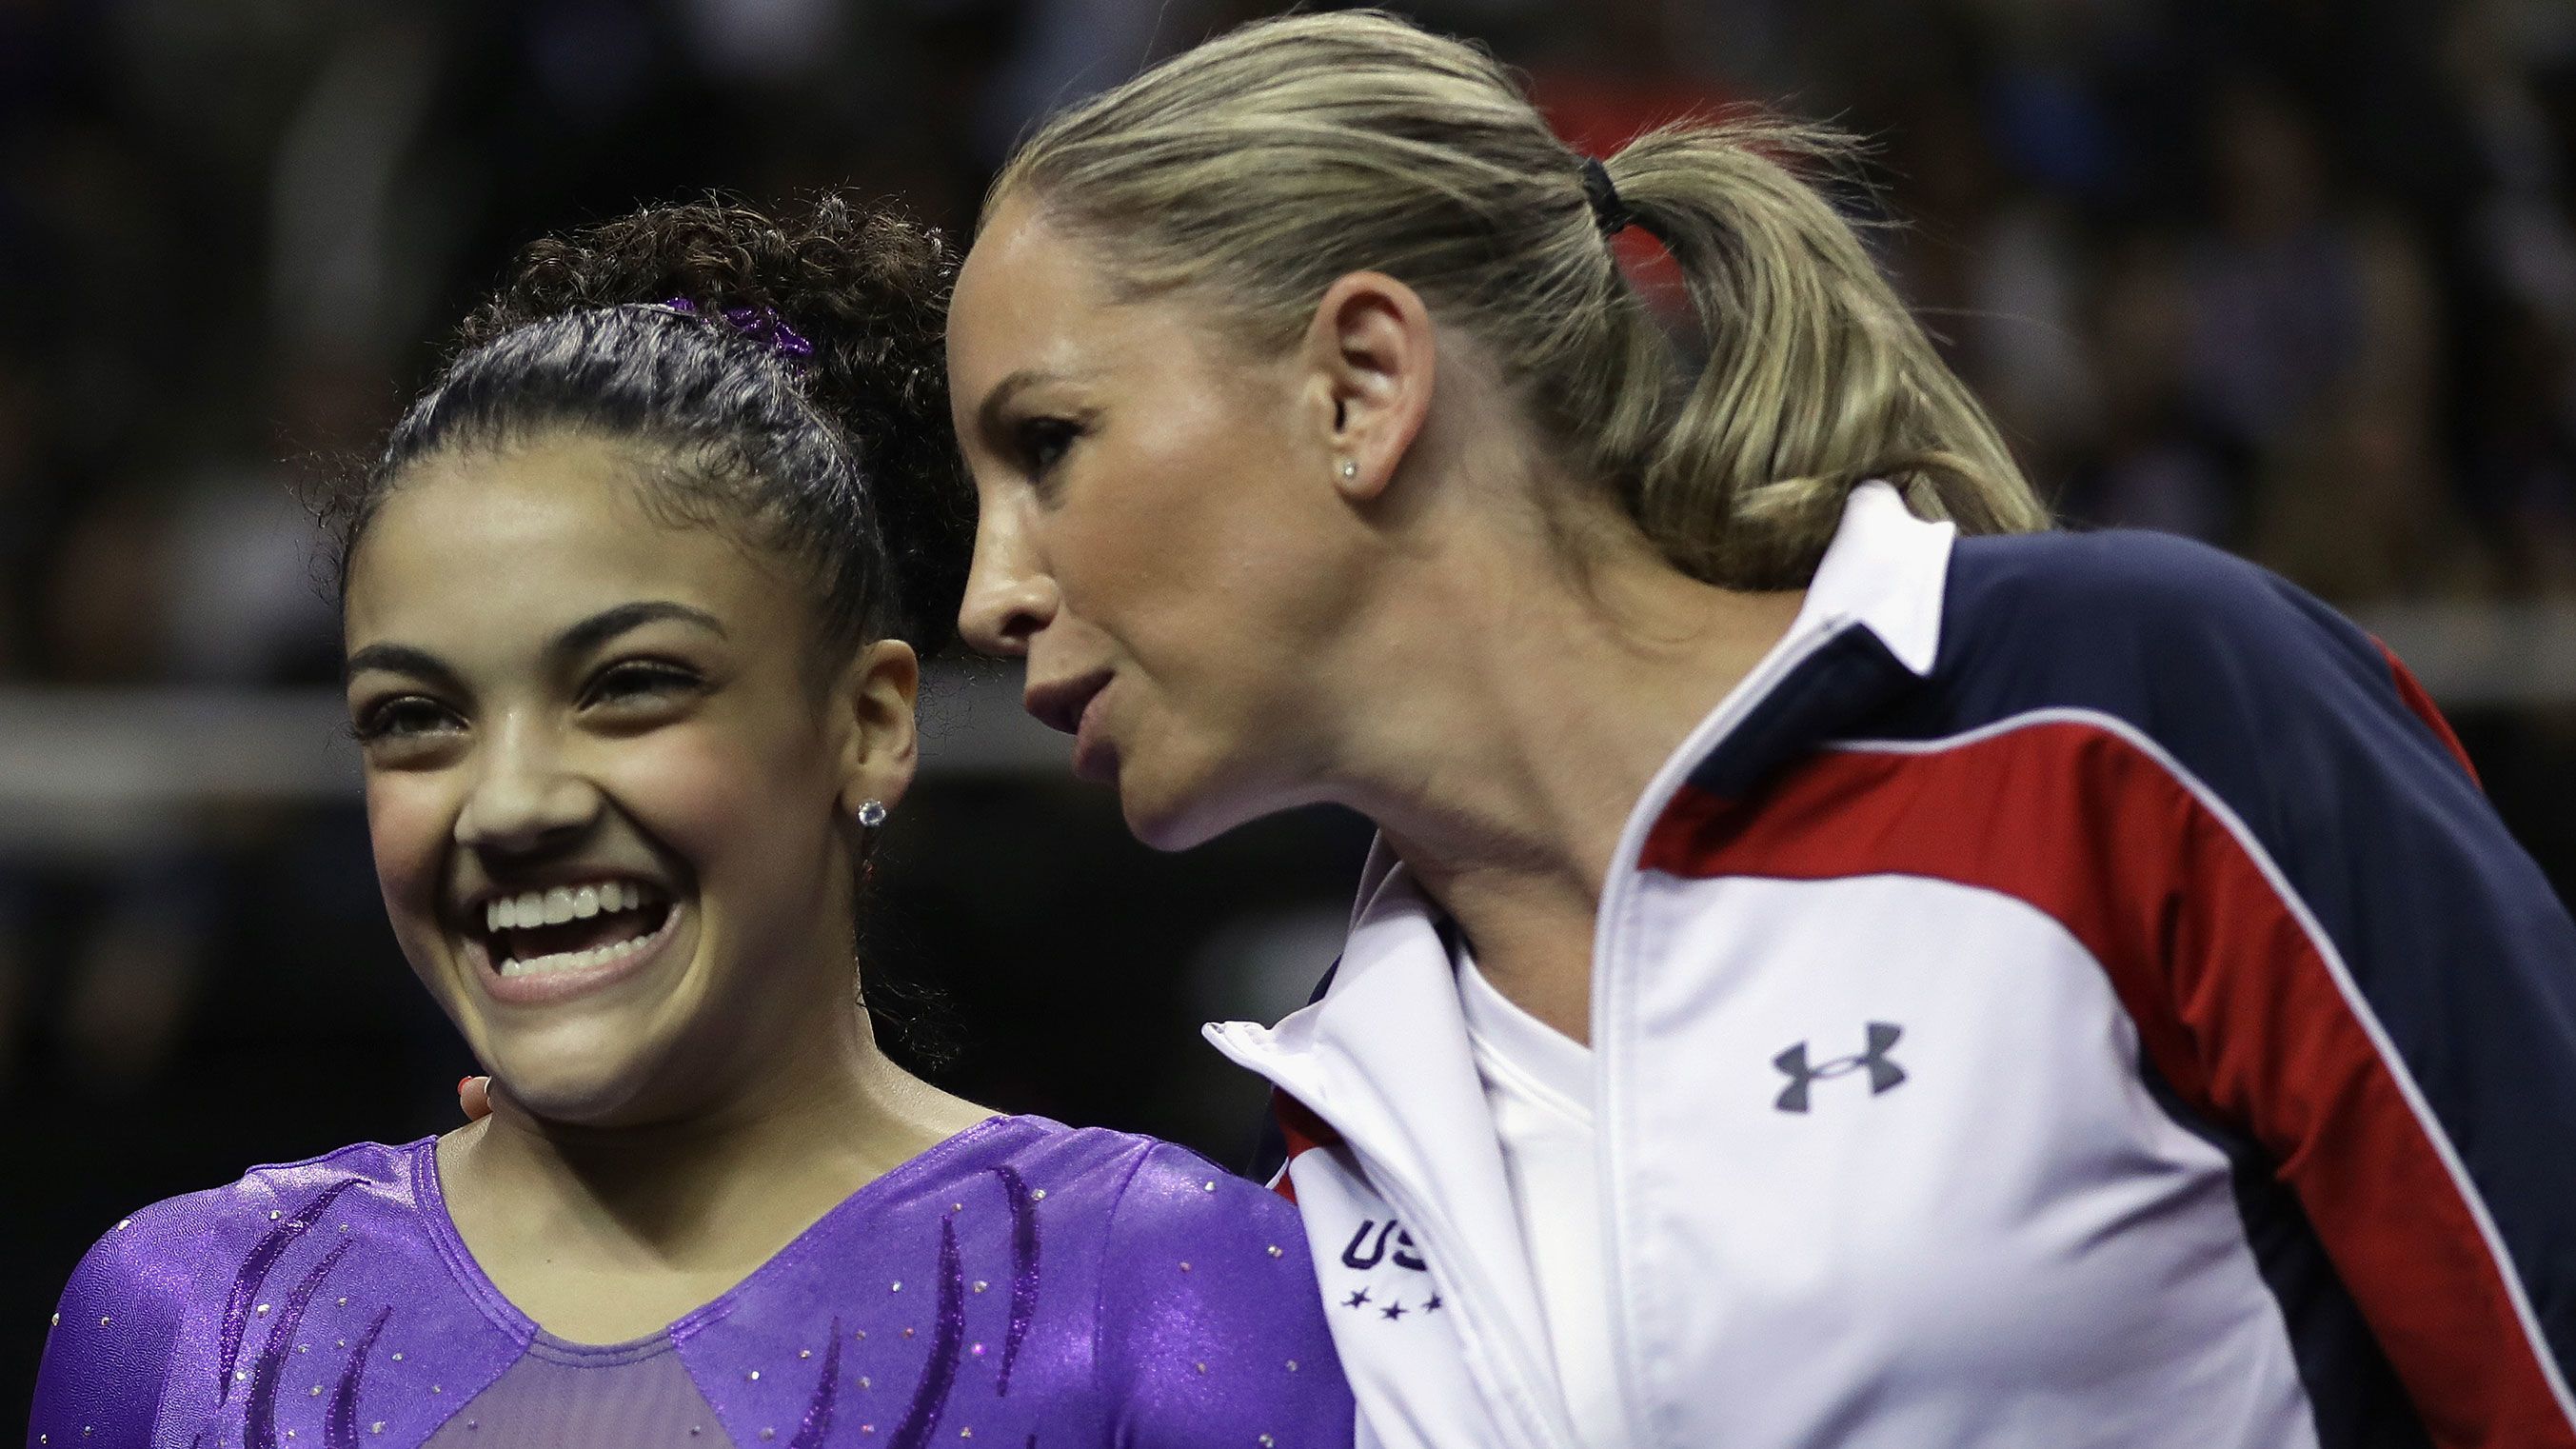 Coach Maggie Haney suspended by USA Gymnastics for 8 years | CNN